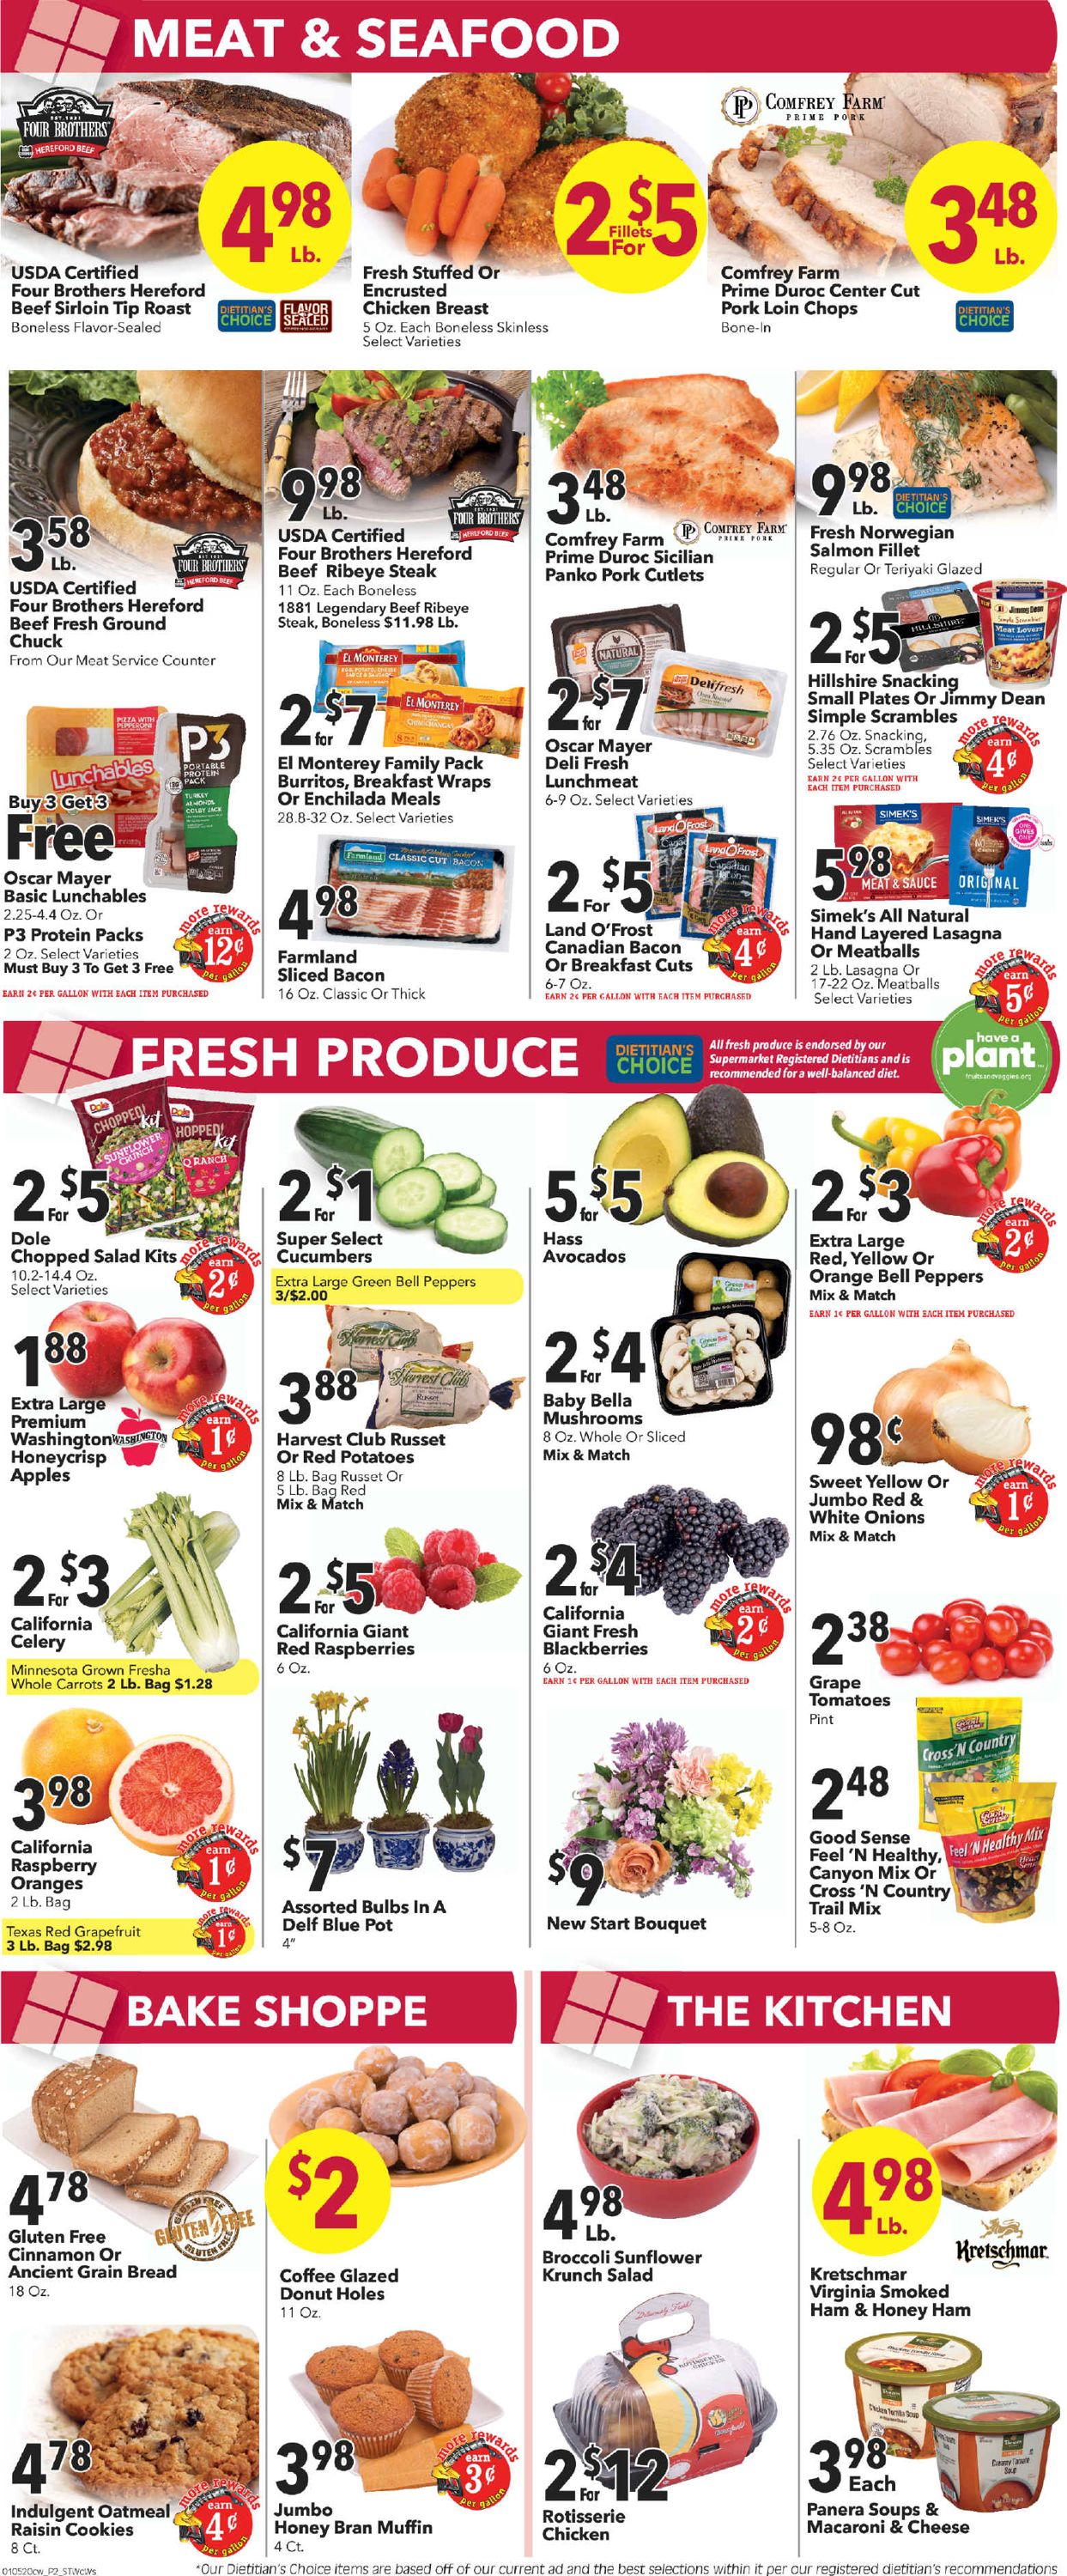 Cash Wise Weekly Ad Circular - valid 01/08-01/14/2020 (Page 2)